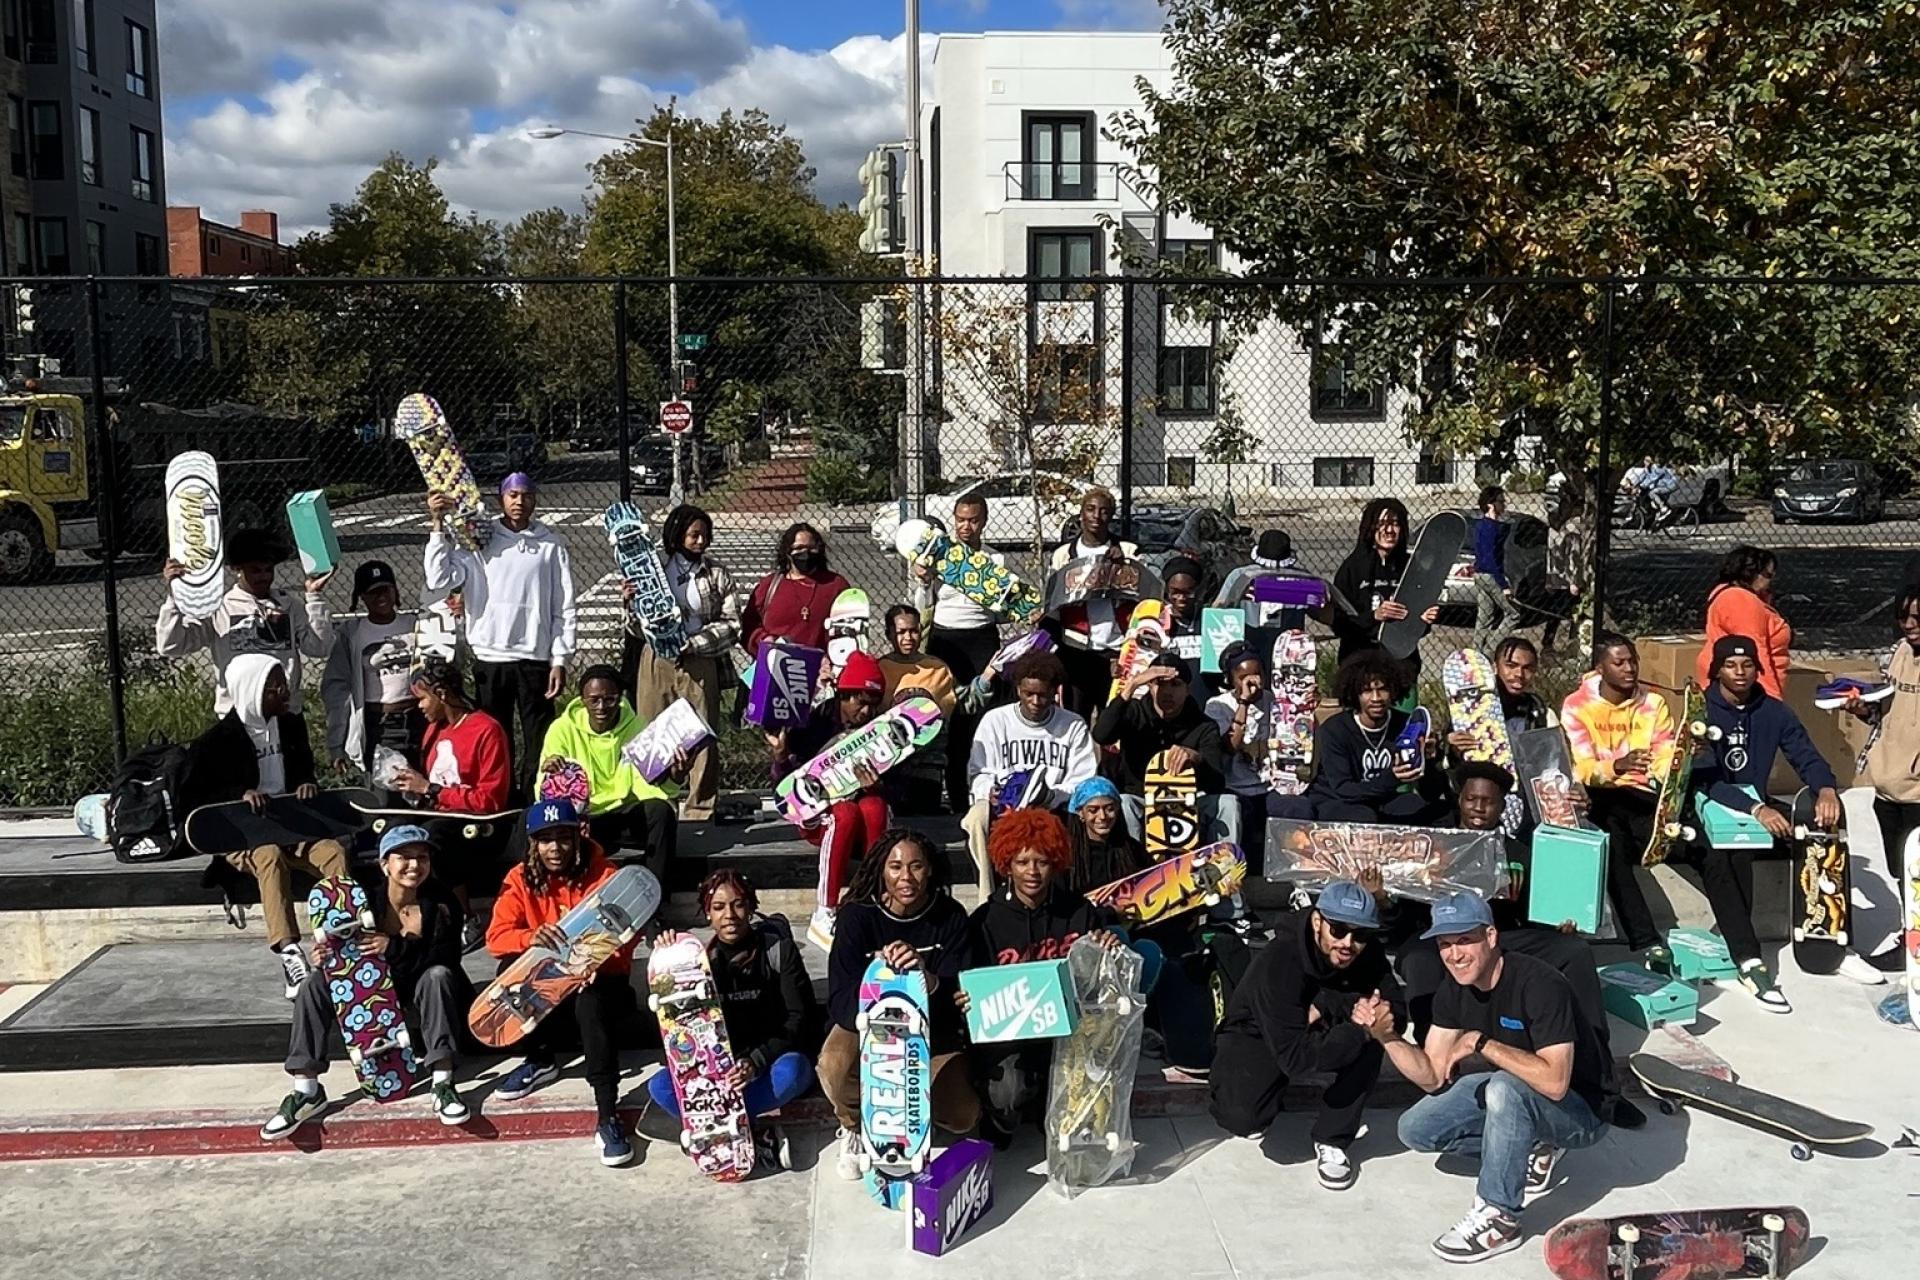 The Howard University Skate Club poses for a photo at their meet-up at Banneker Park. Monyell Sessoms and Kameren Halliday, the respective president and vice president of the organization, says that their events at Banneker Park welcomes all ages to skate. (Photo Credit: HU Skate Club)